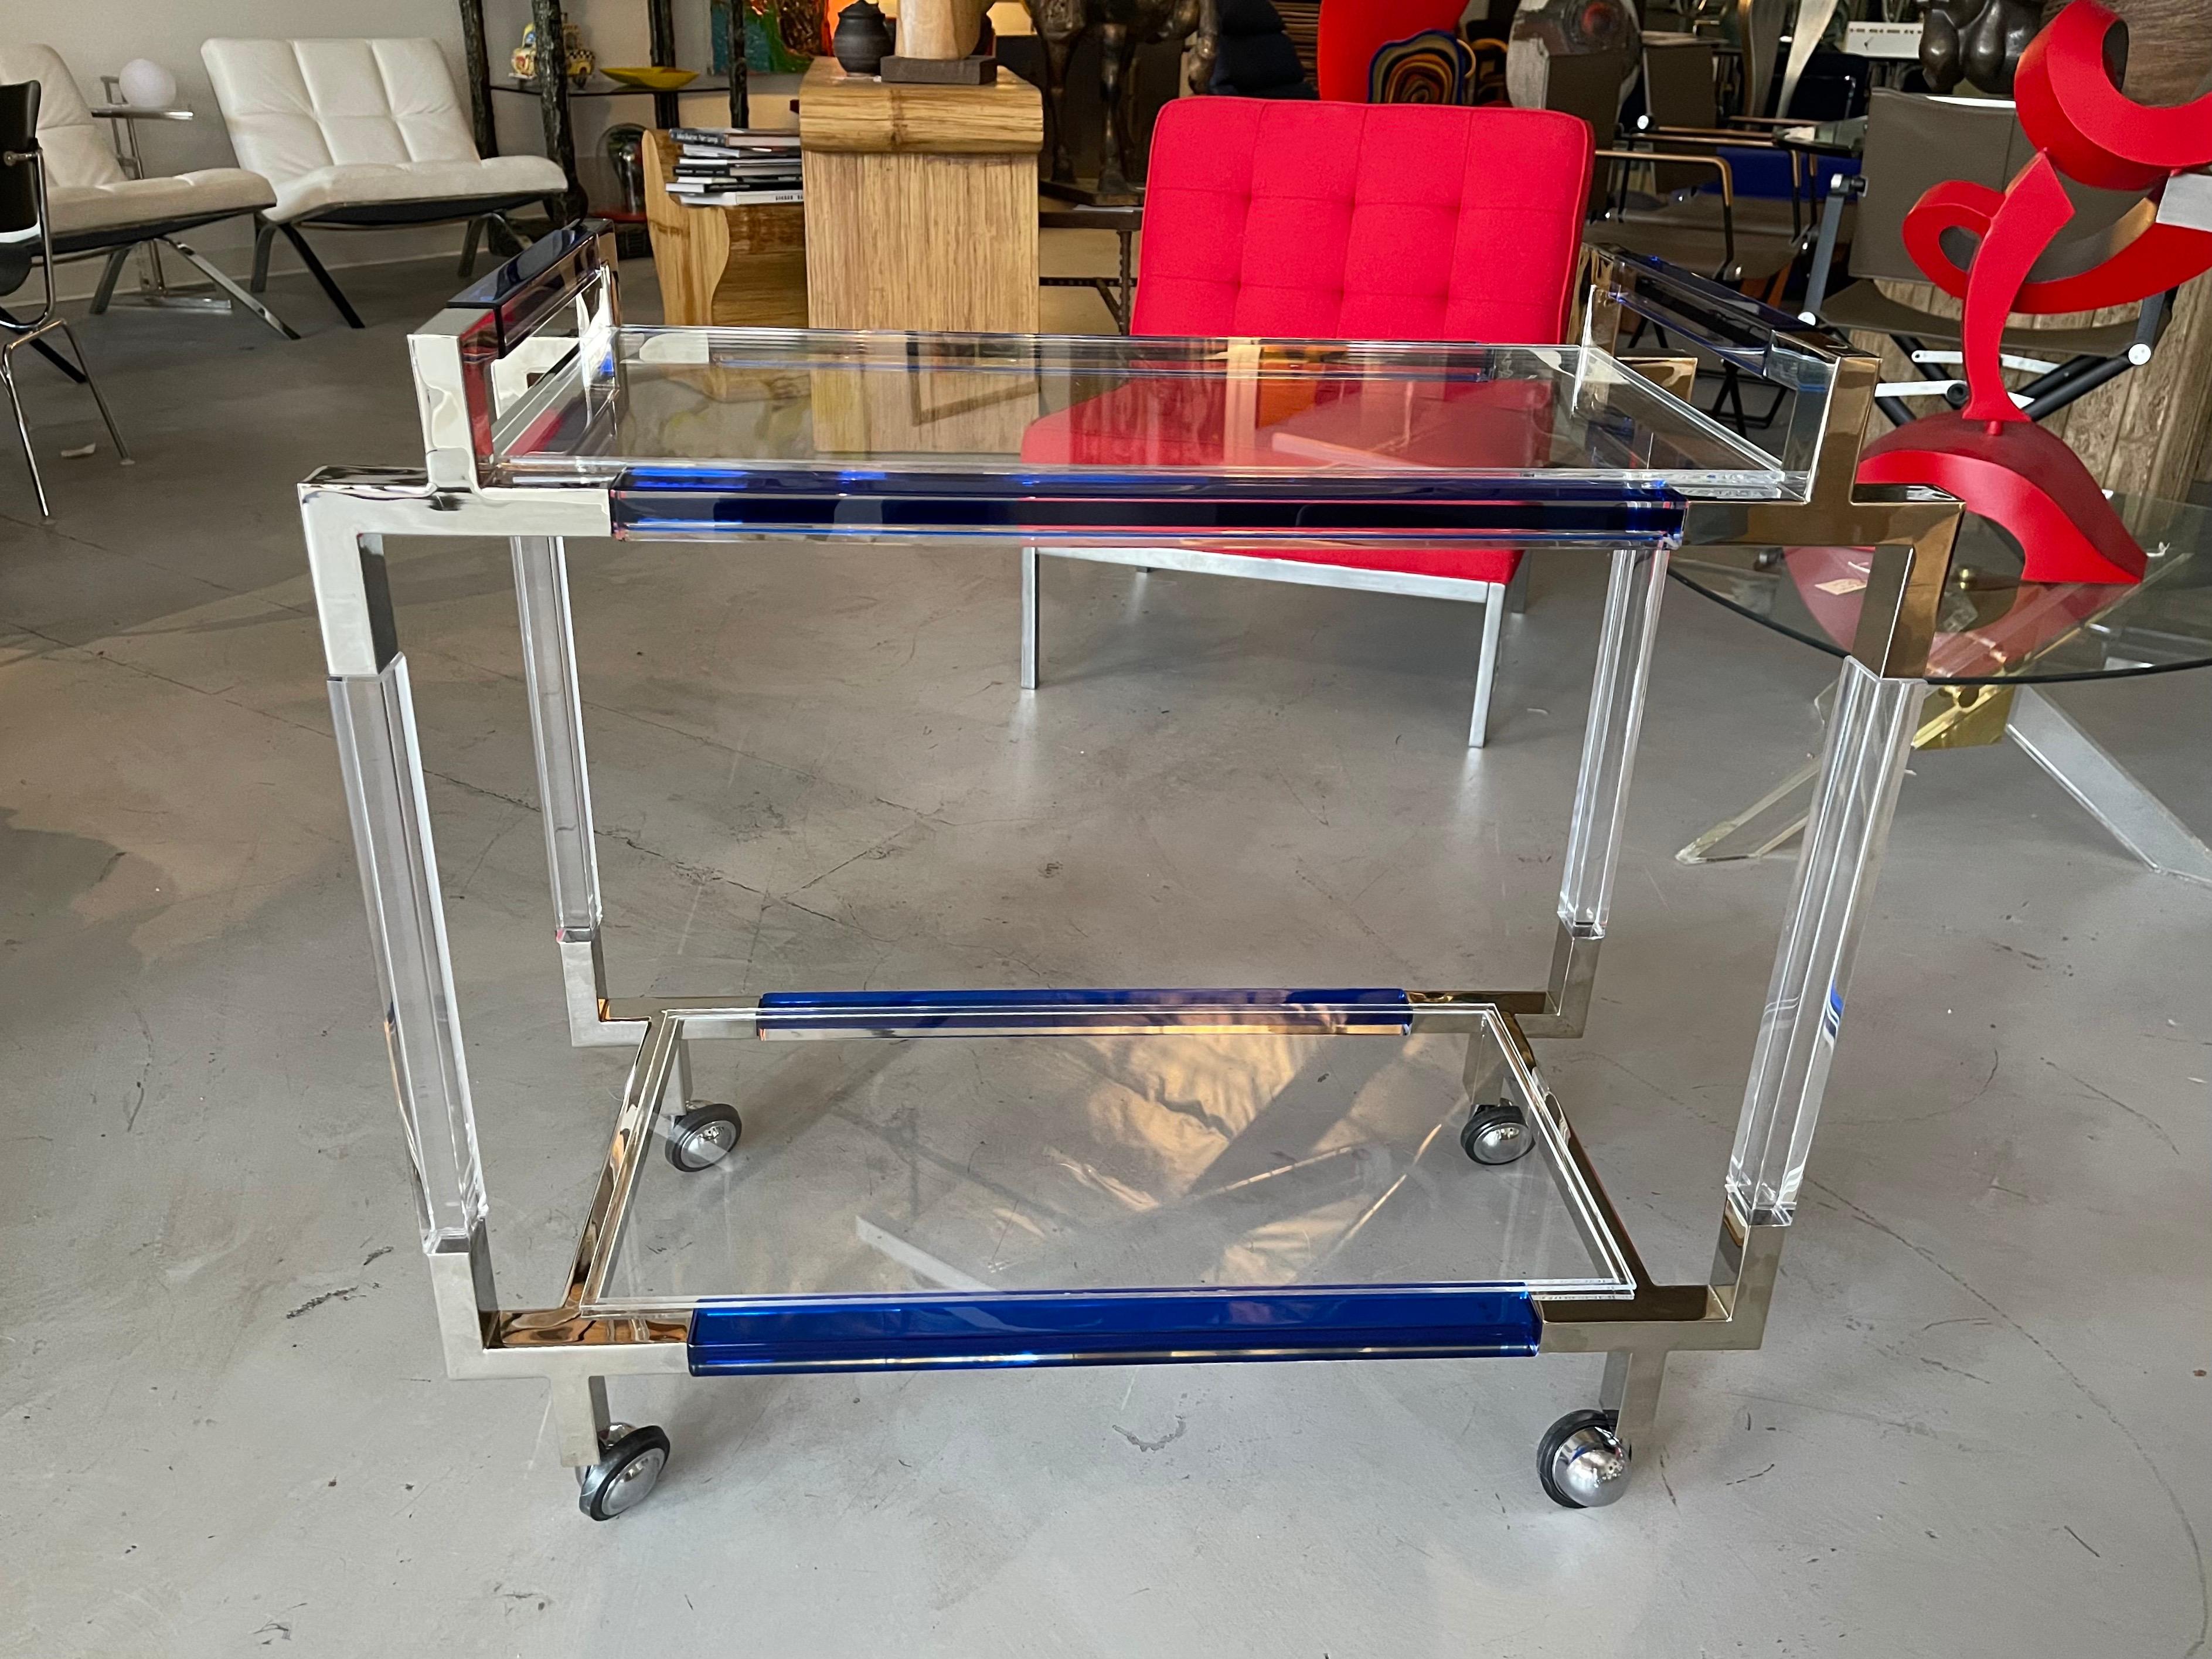 A lovely Charles Hollis Jones bar cart with Cobalt blue colored accent sides and handles. On castors for easy movement. The top and bottom shelf are lucite. The trim is polished nickel.